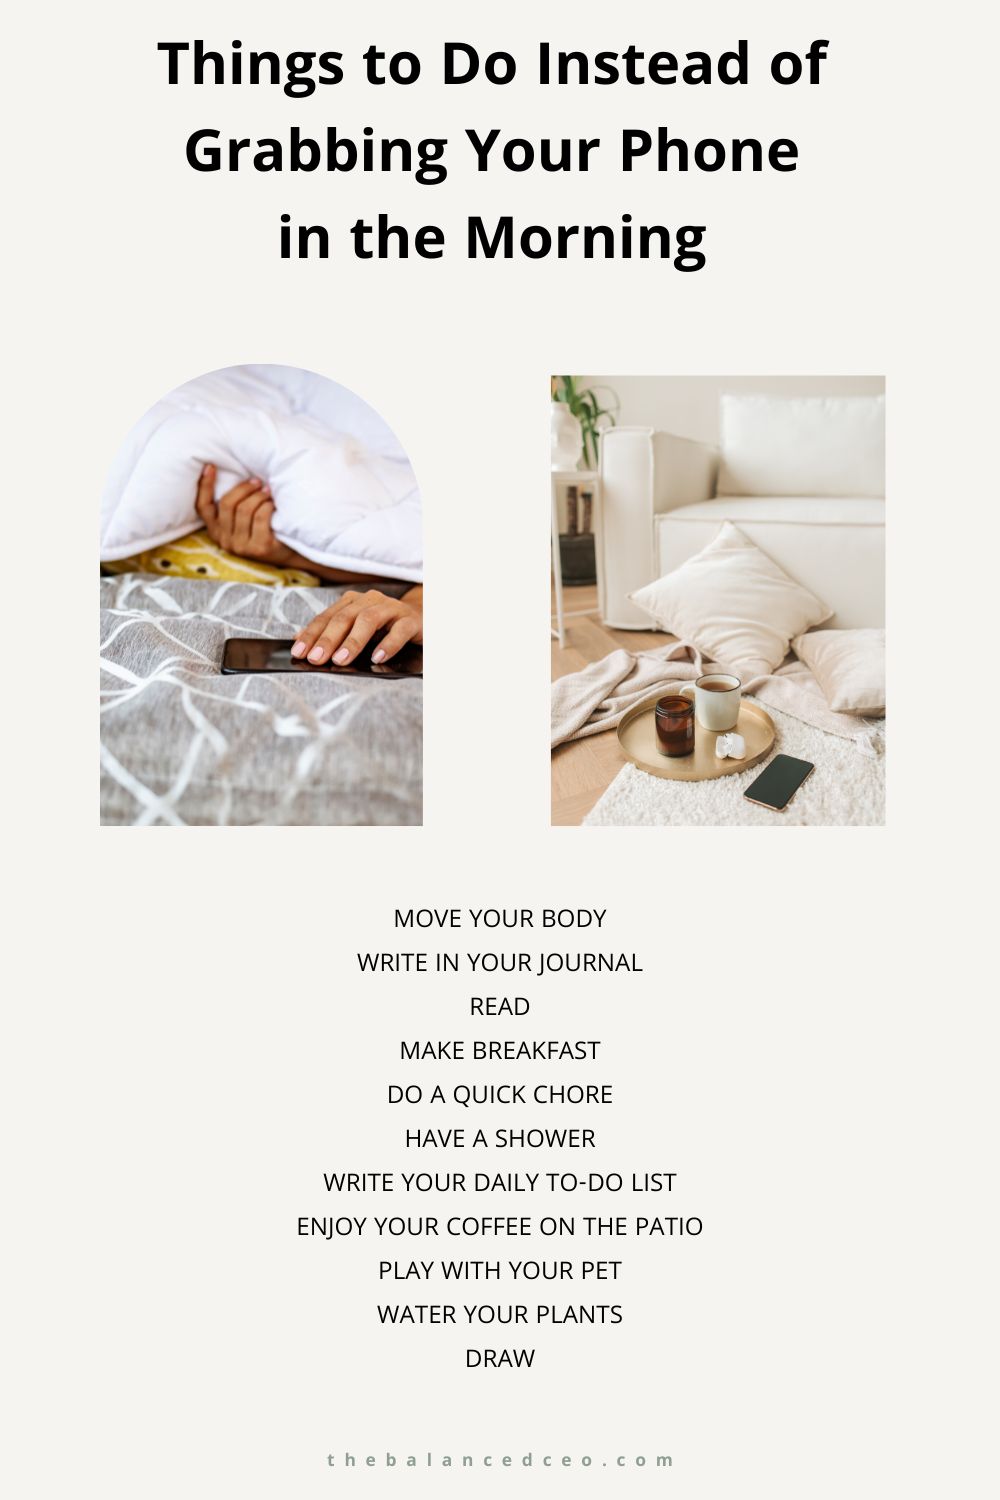 Things to Do in the Morning Instead of Grabbing Your Phone